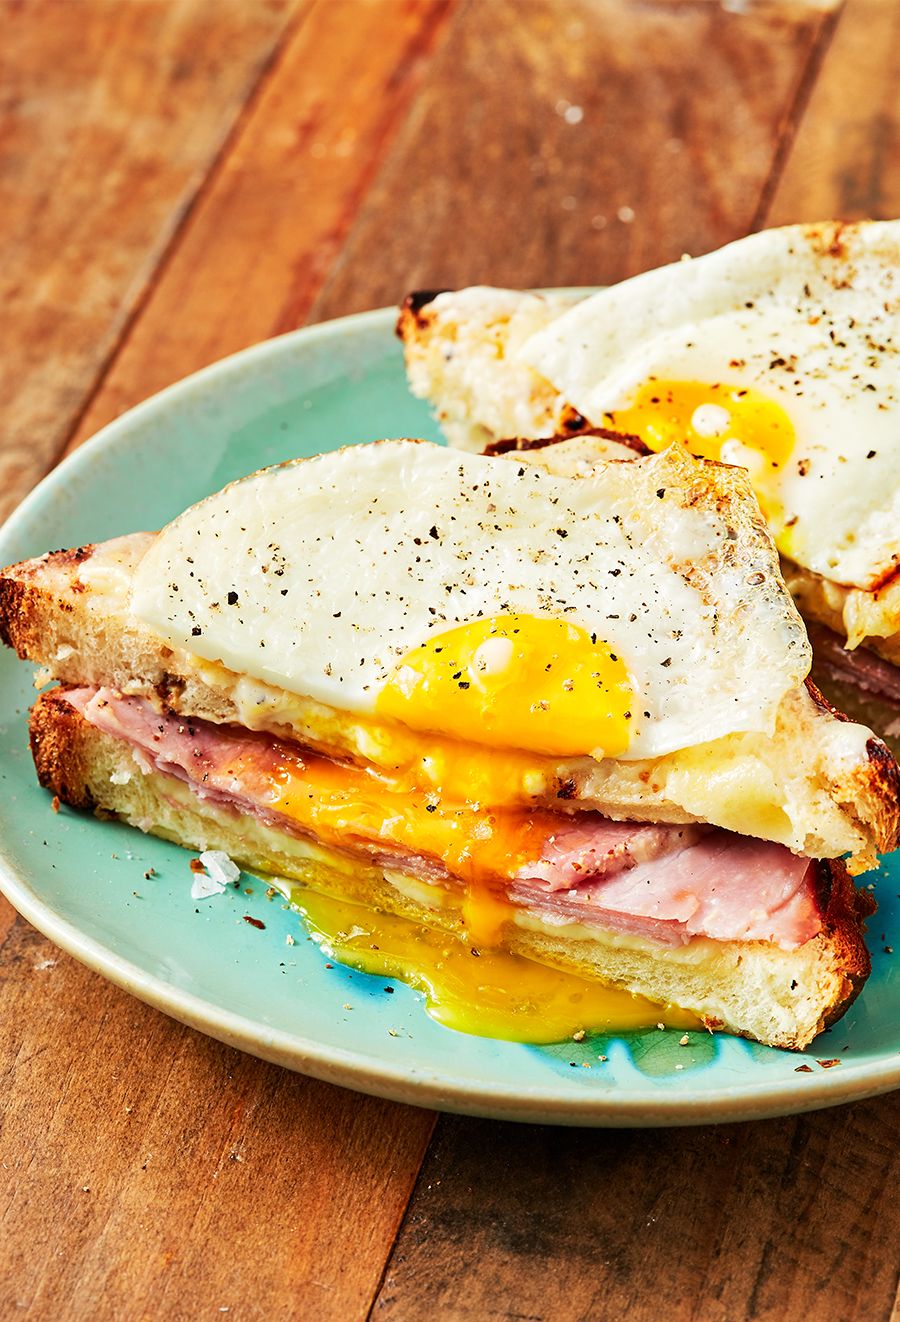 50 Best Leftover Ham Recipes - What To Do With Leftover Ham